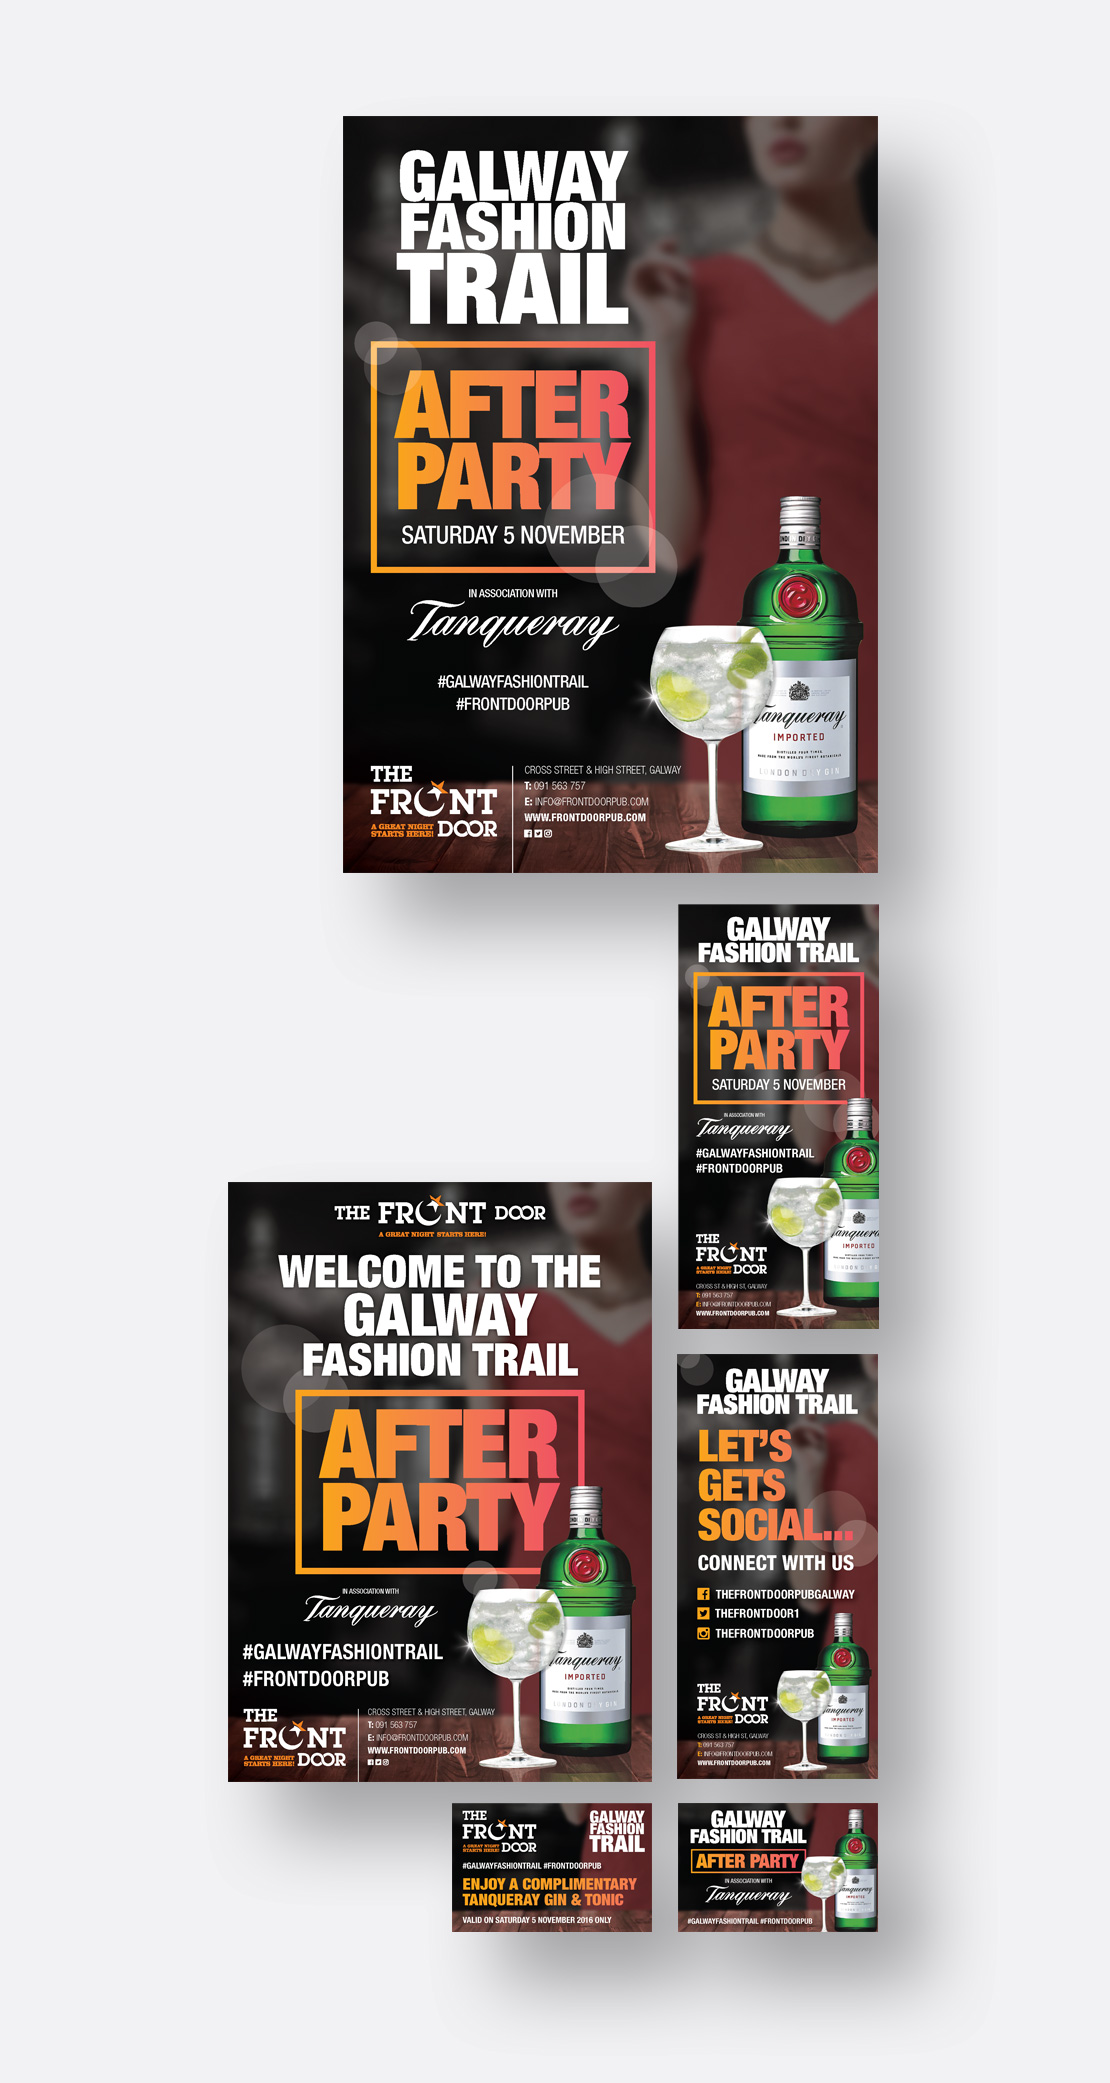 The Front Door Galway Fashion Trail After-Party promotional material